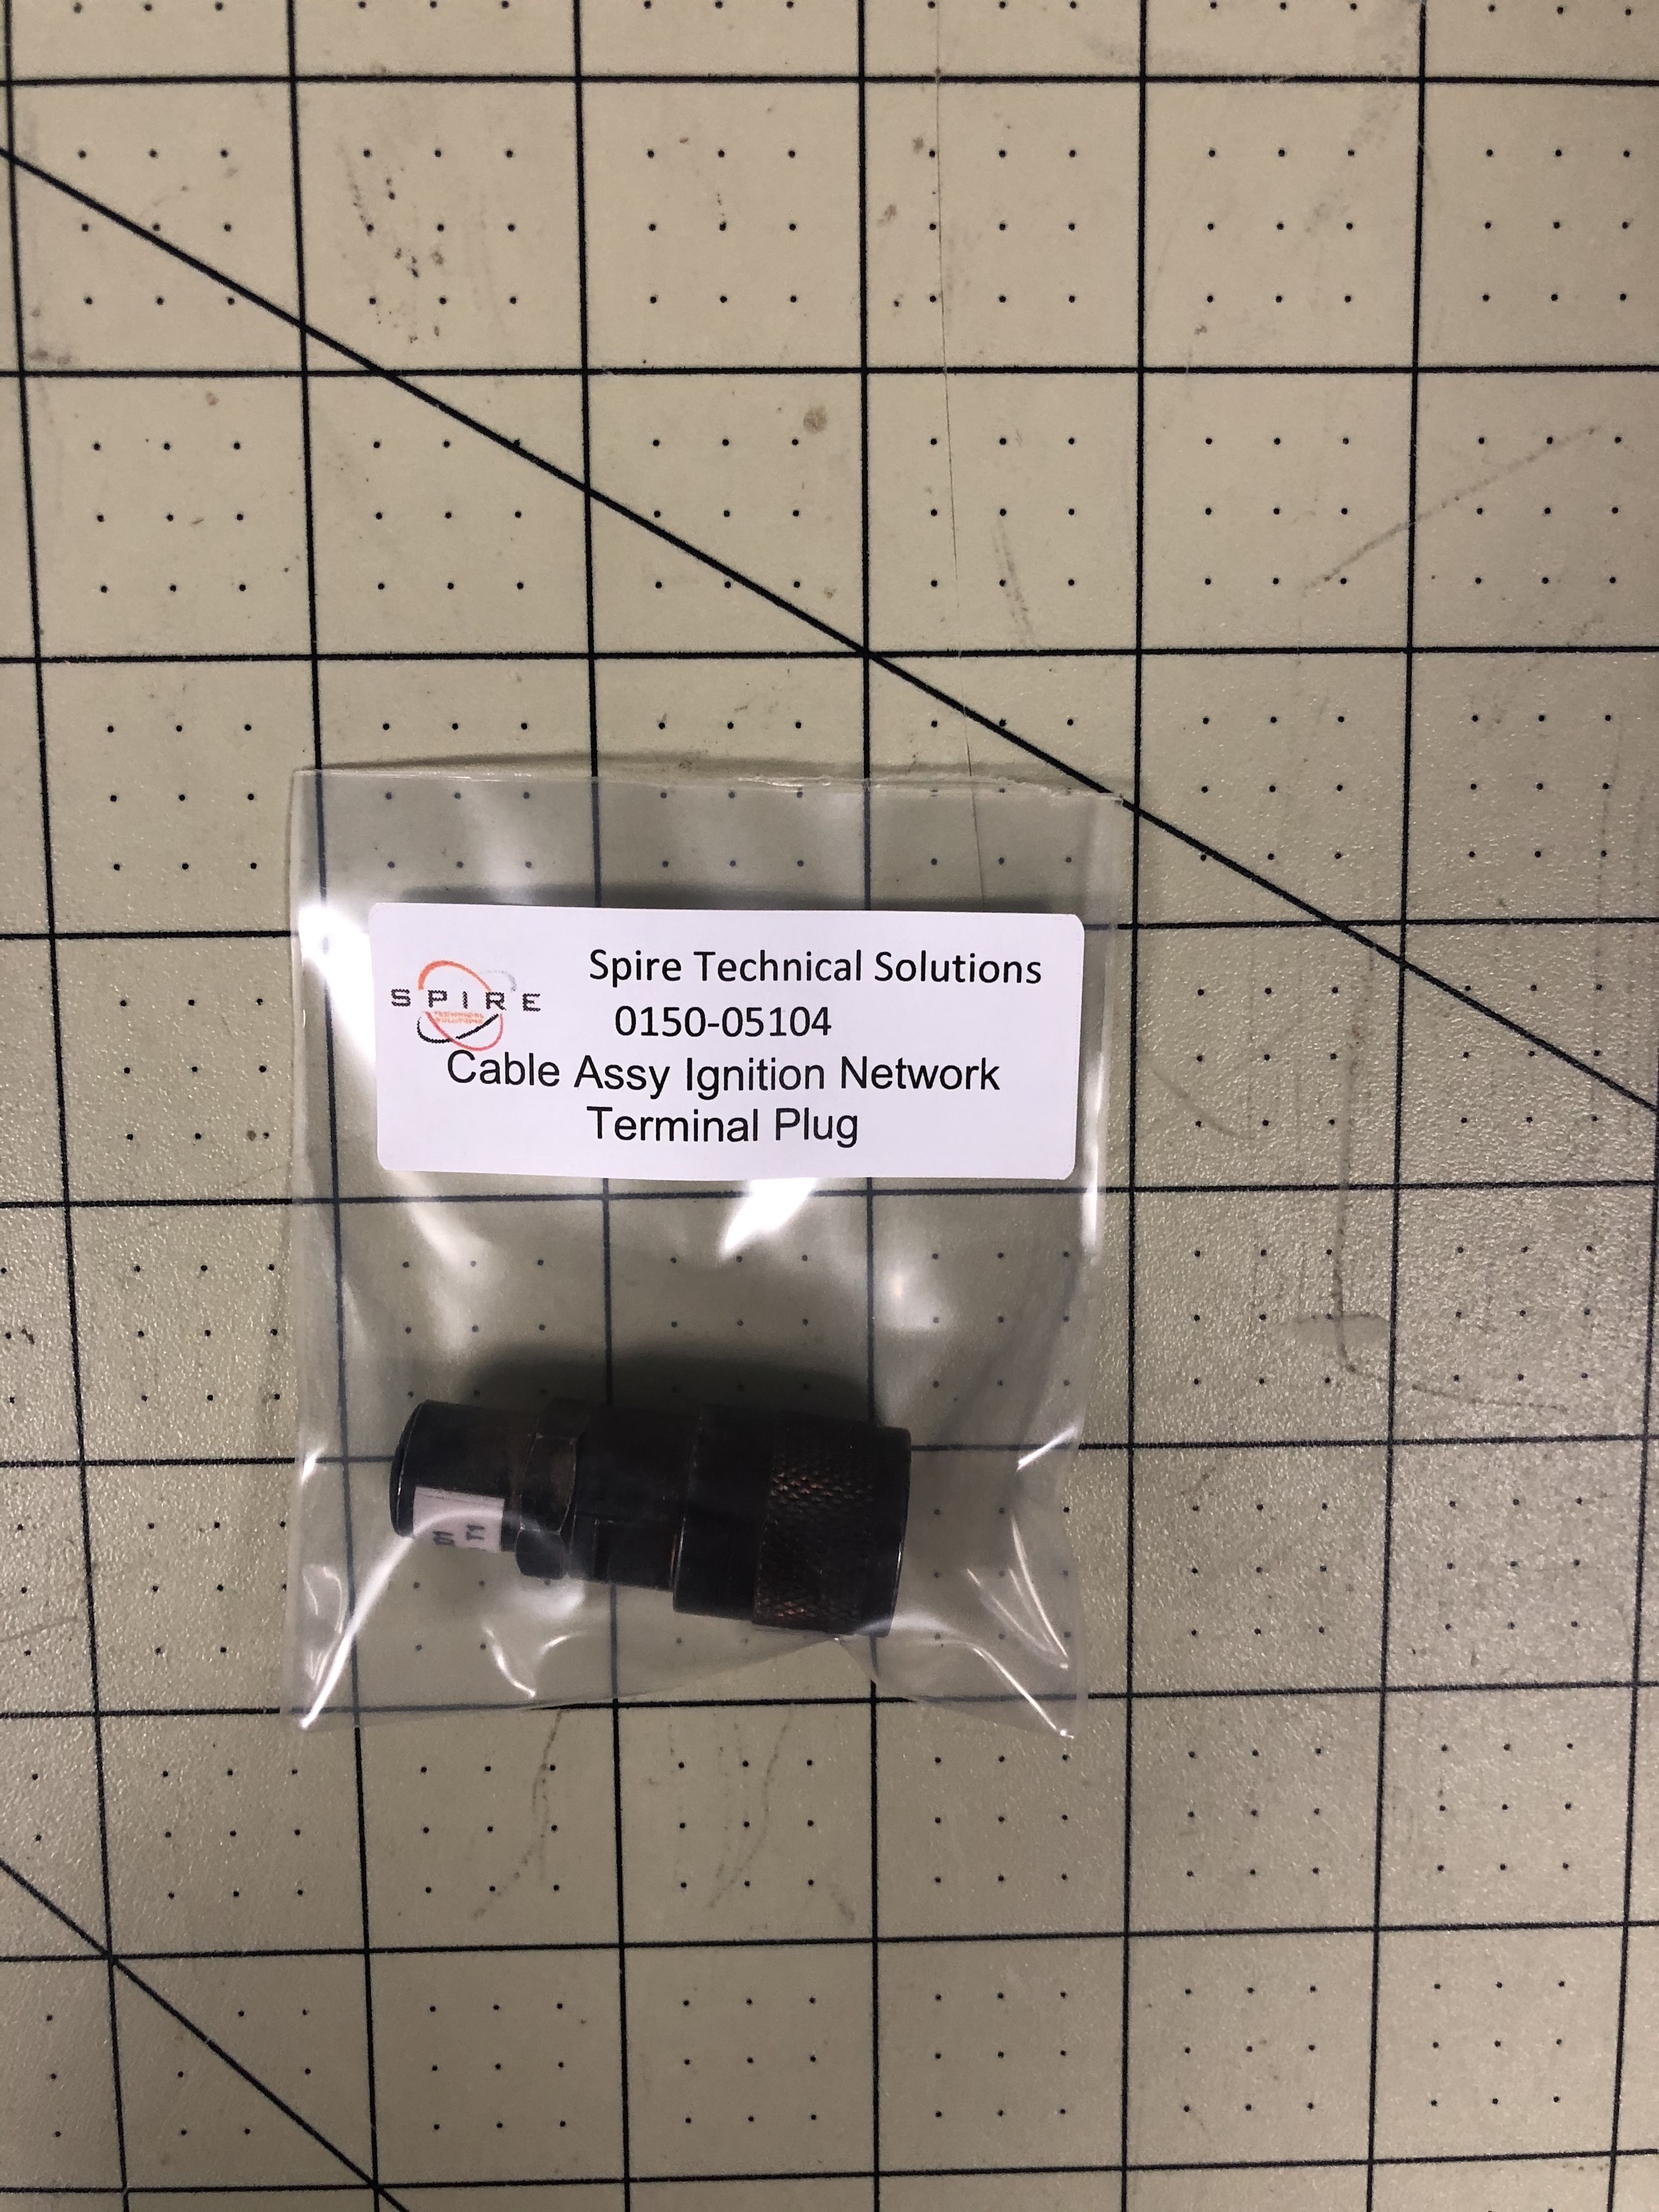 Cable Assy Ignition Network Terminal Plug